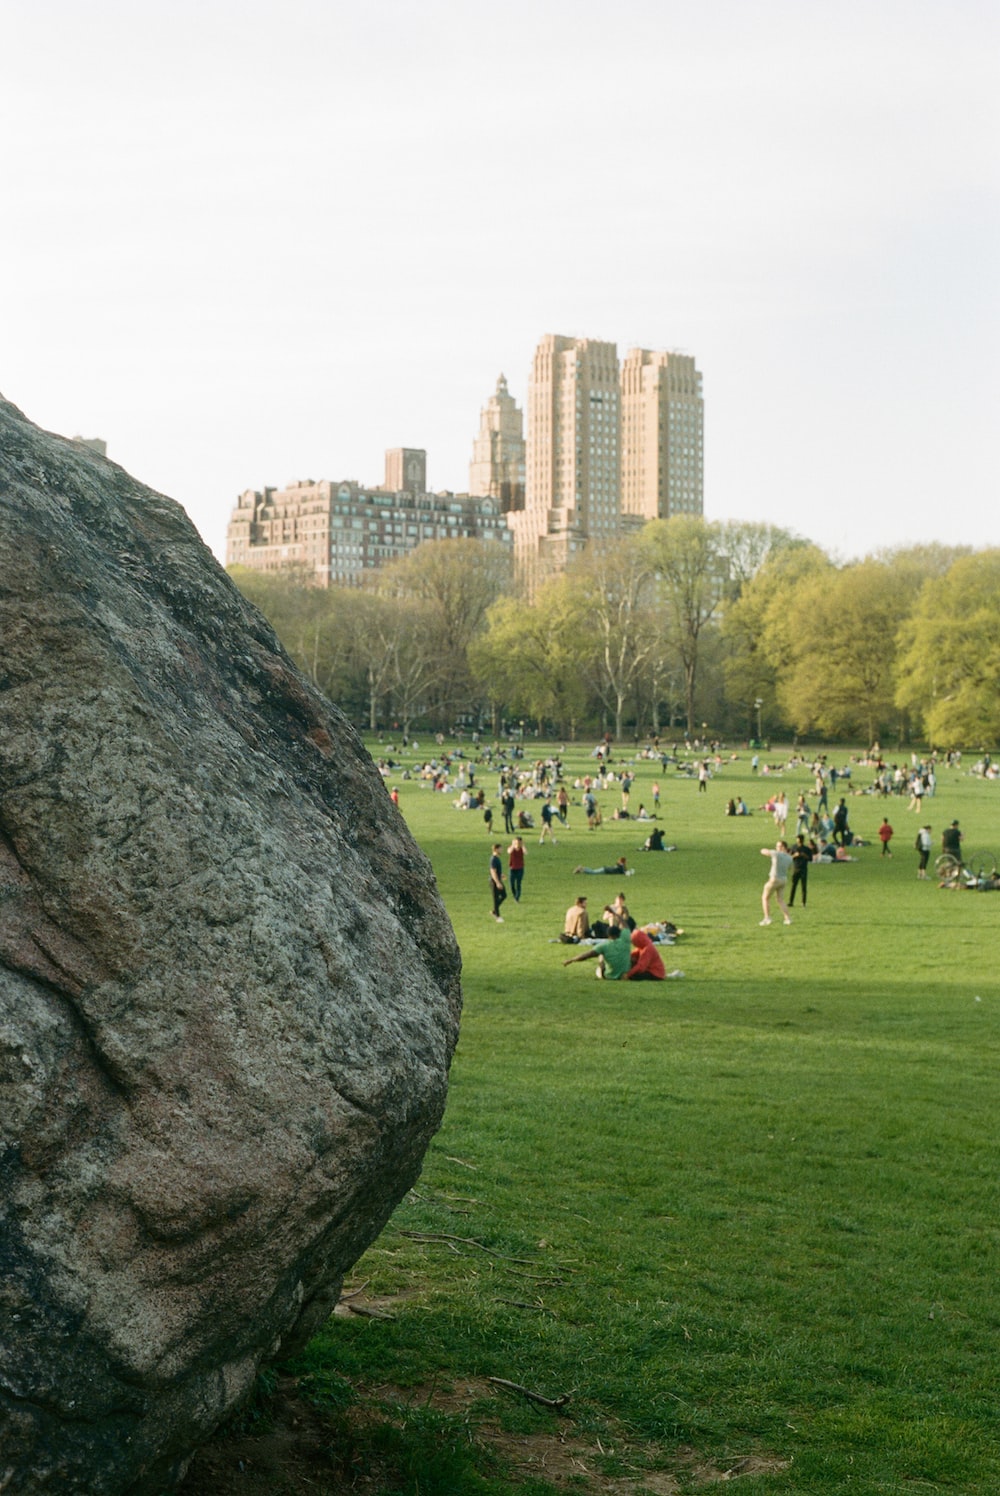 a large group of people in a park with a large rock in the middle